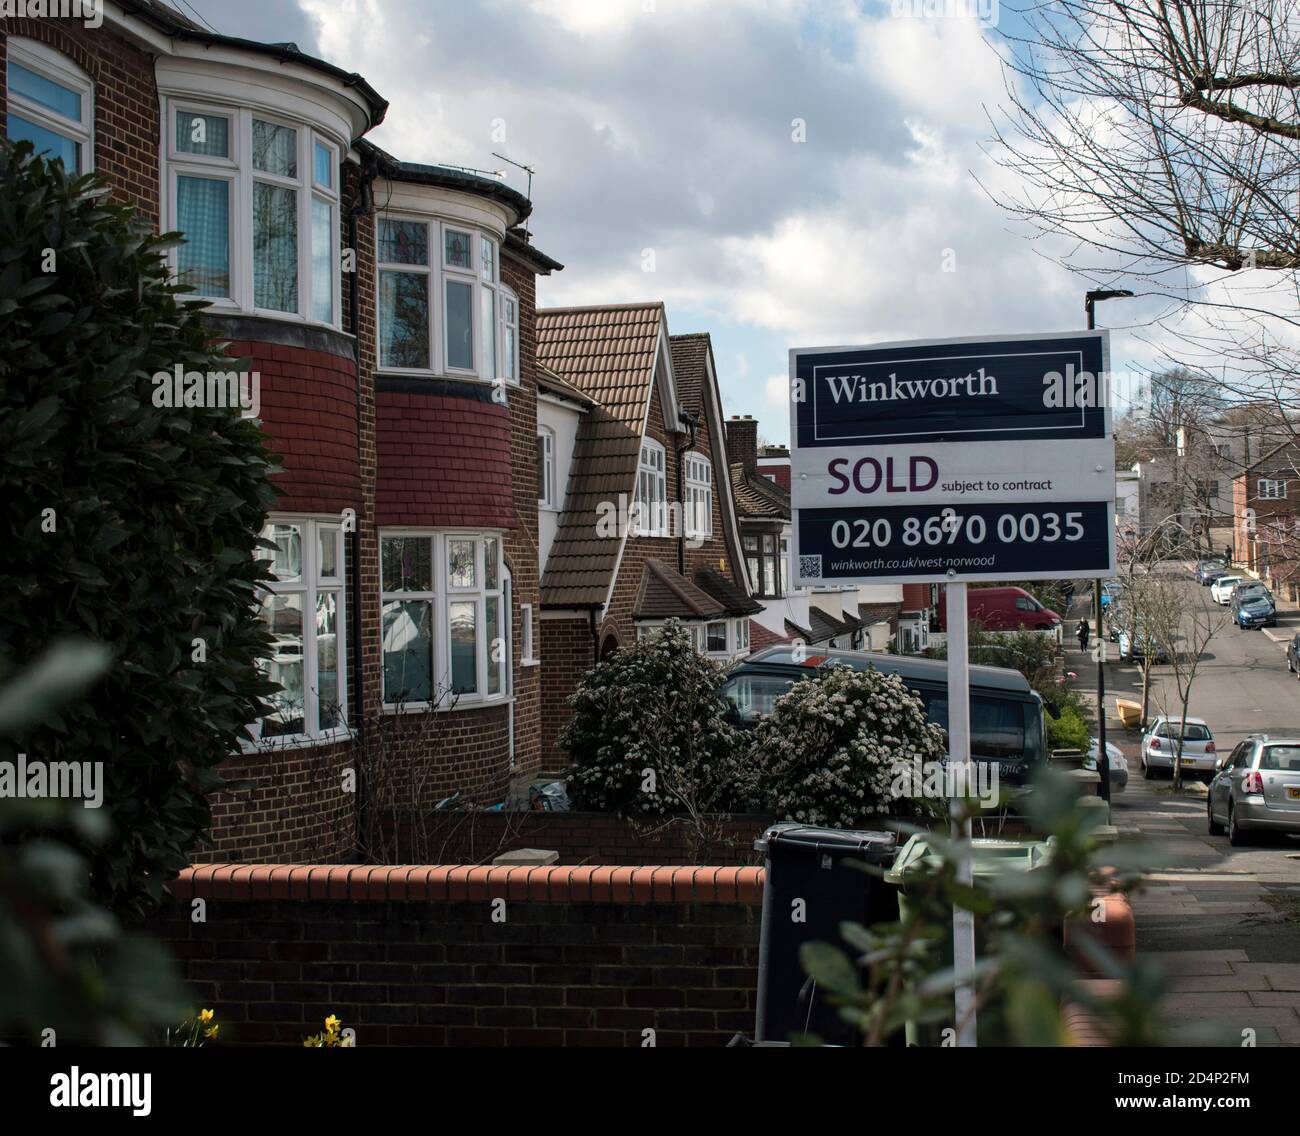 London, Uk - March 13th 2020: Sold sign from Winkworth estate agent on a London street lined with houses Stock Photo